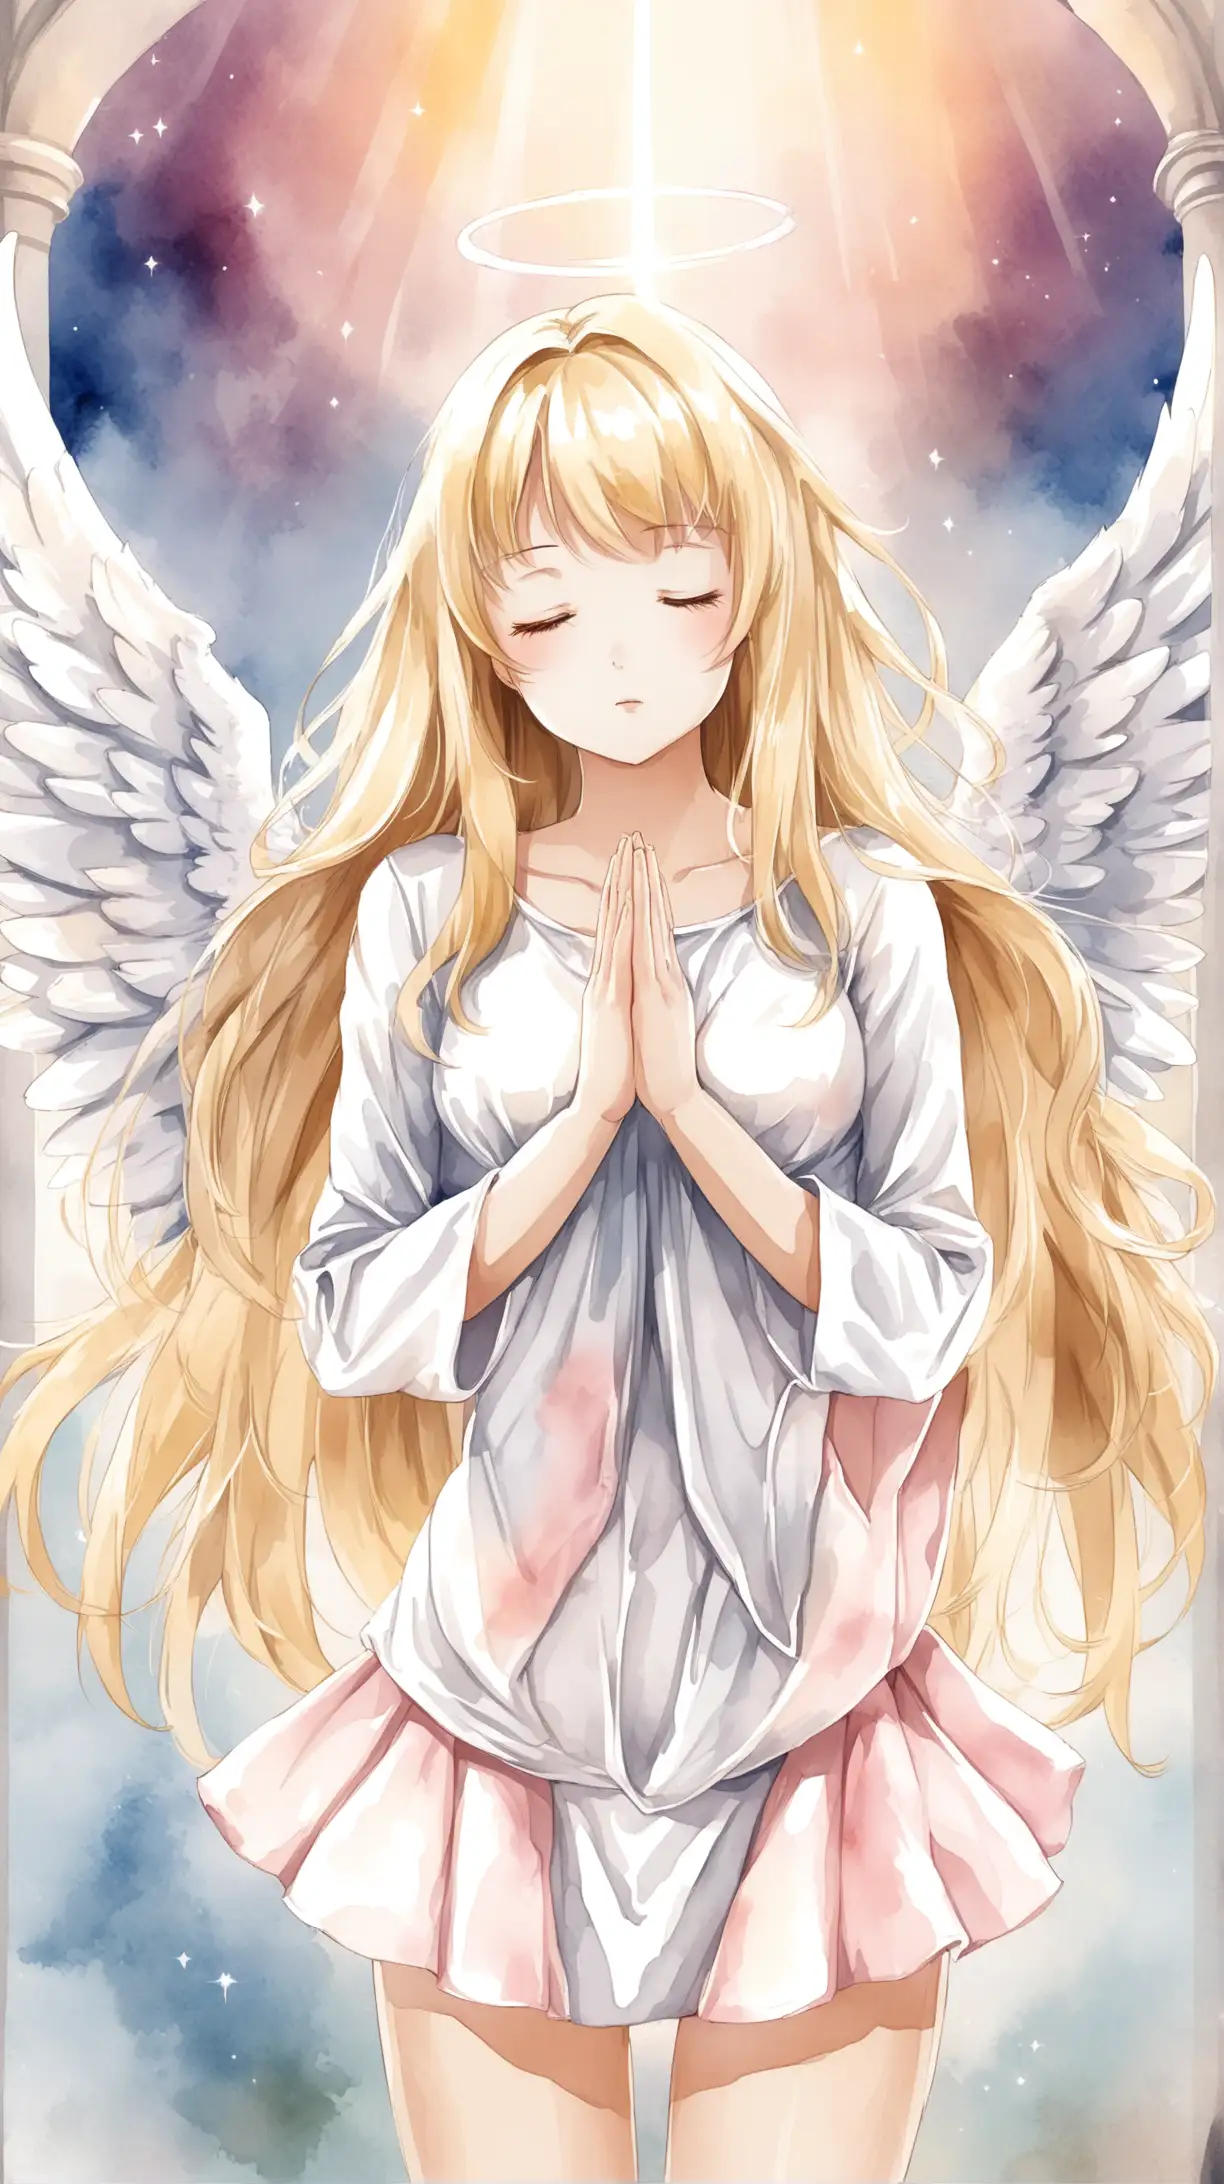 Anime Watercolor Painting of a Sexy Woman Praying in Angel Costume with Blonde Hair